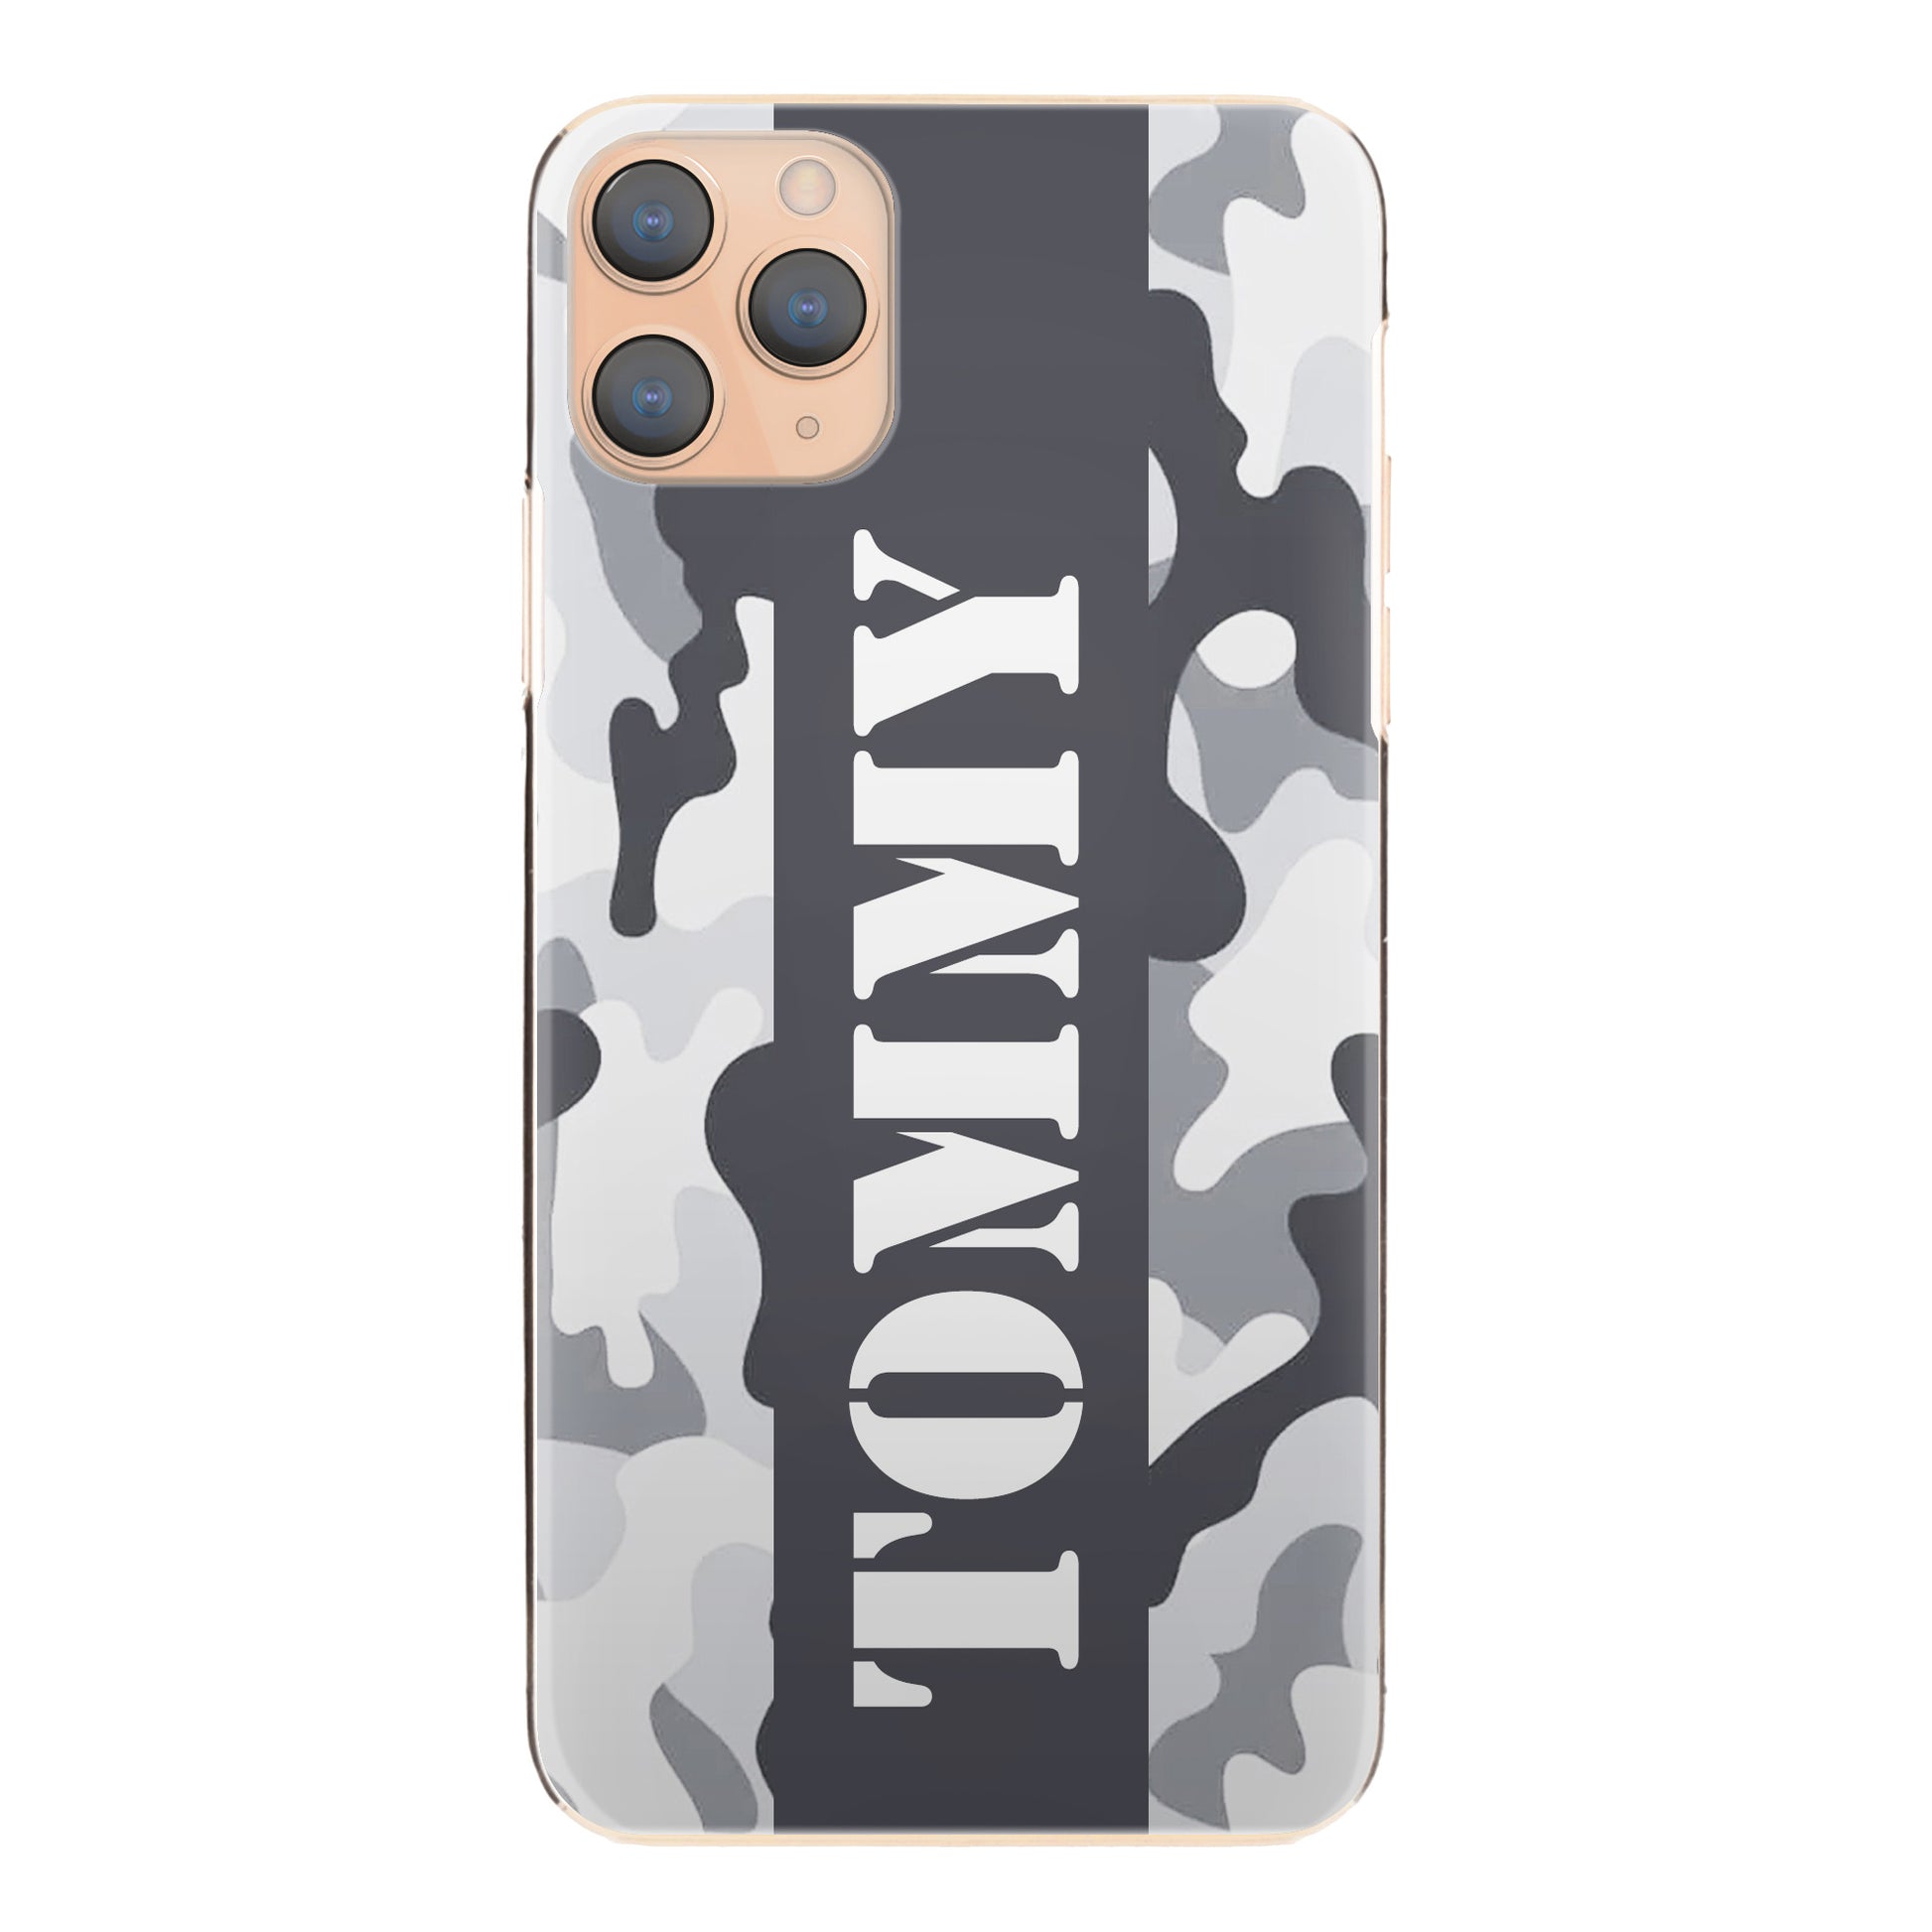 Personalised Apple iPhone Hard Case with Military Text on Artic Camo